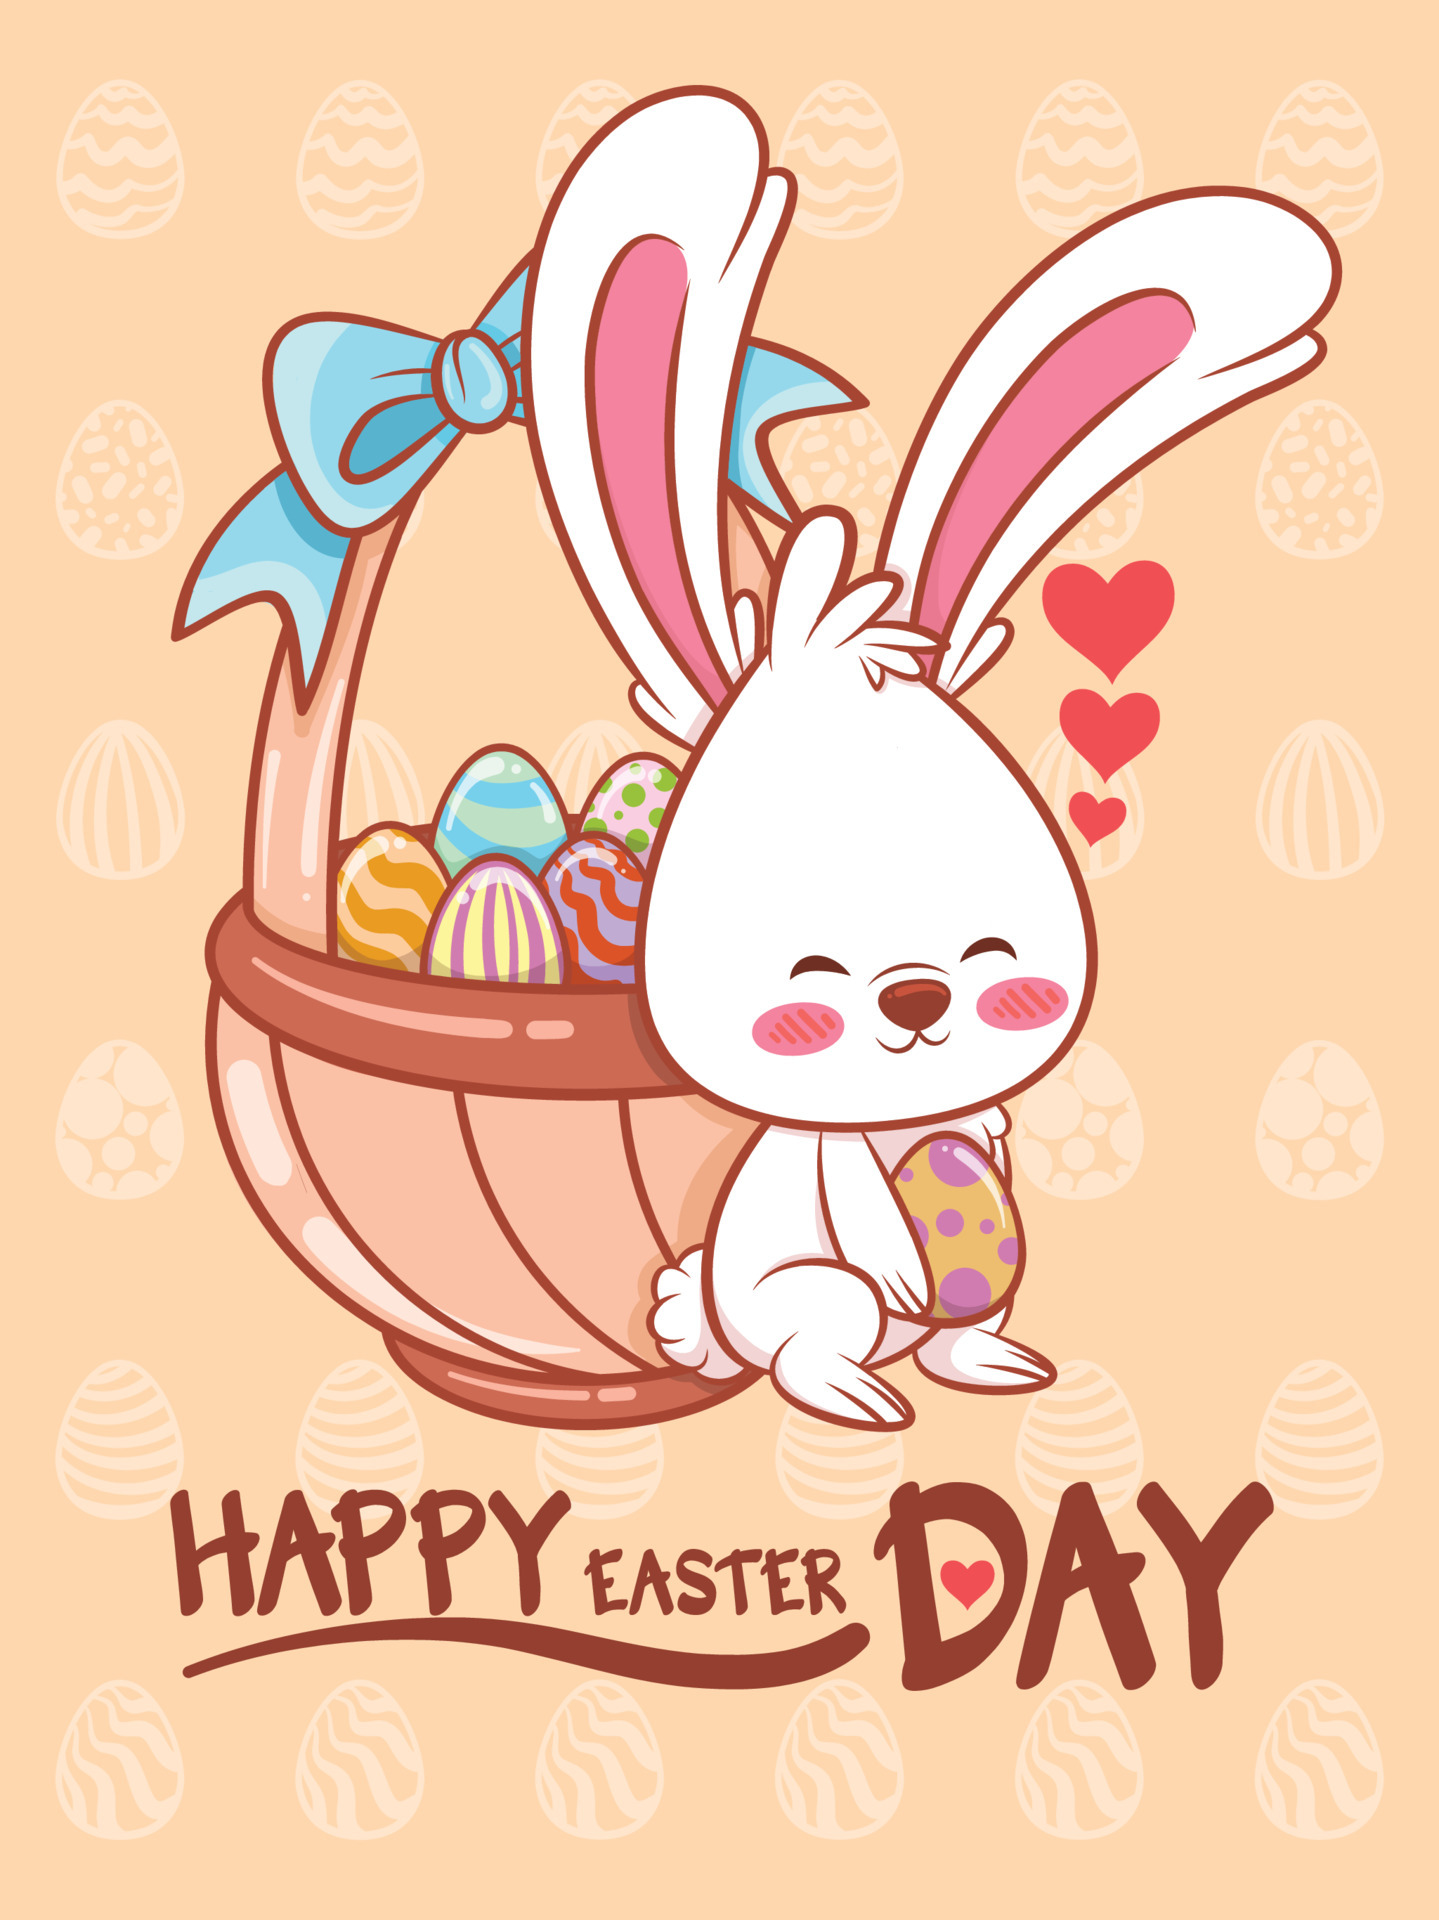 Cute bunny with easter eggs decorated. cartoon character illustration happy easter day concept